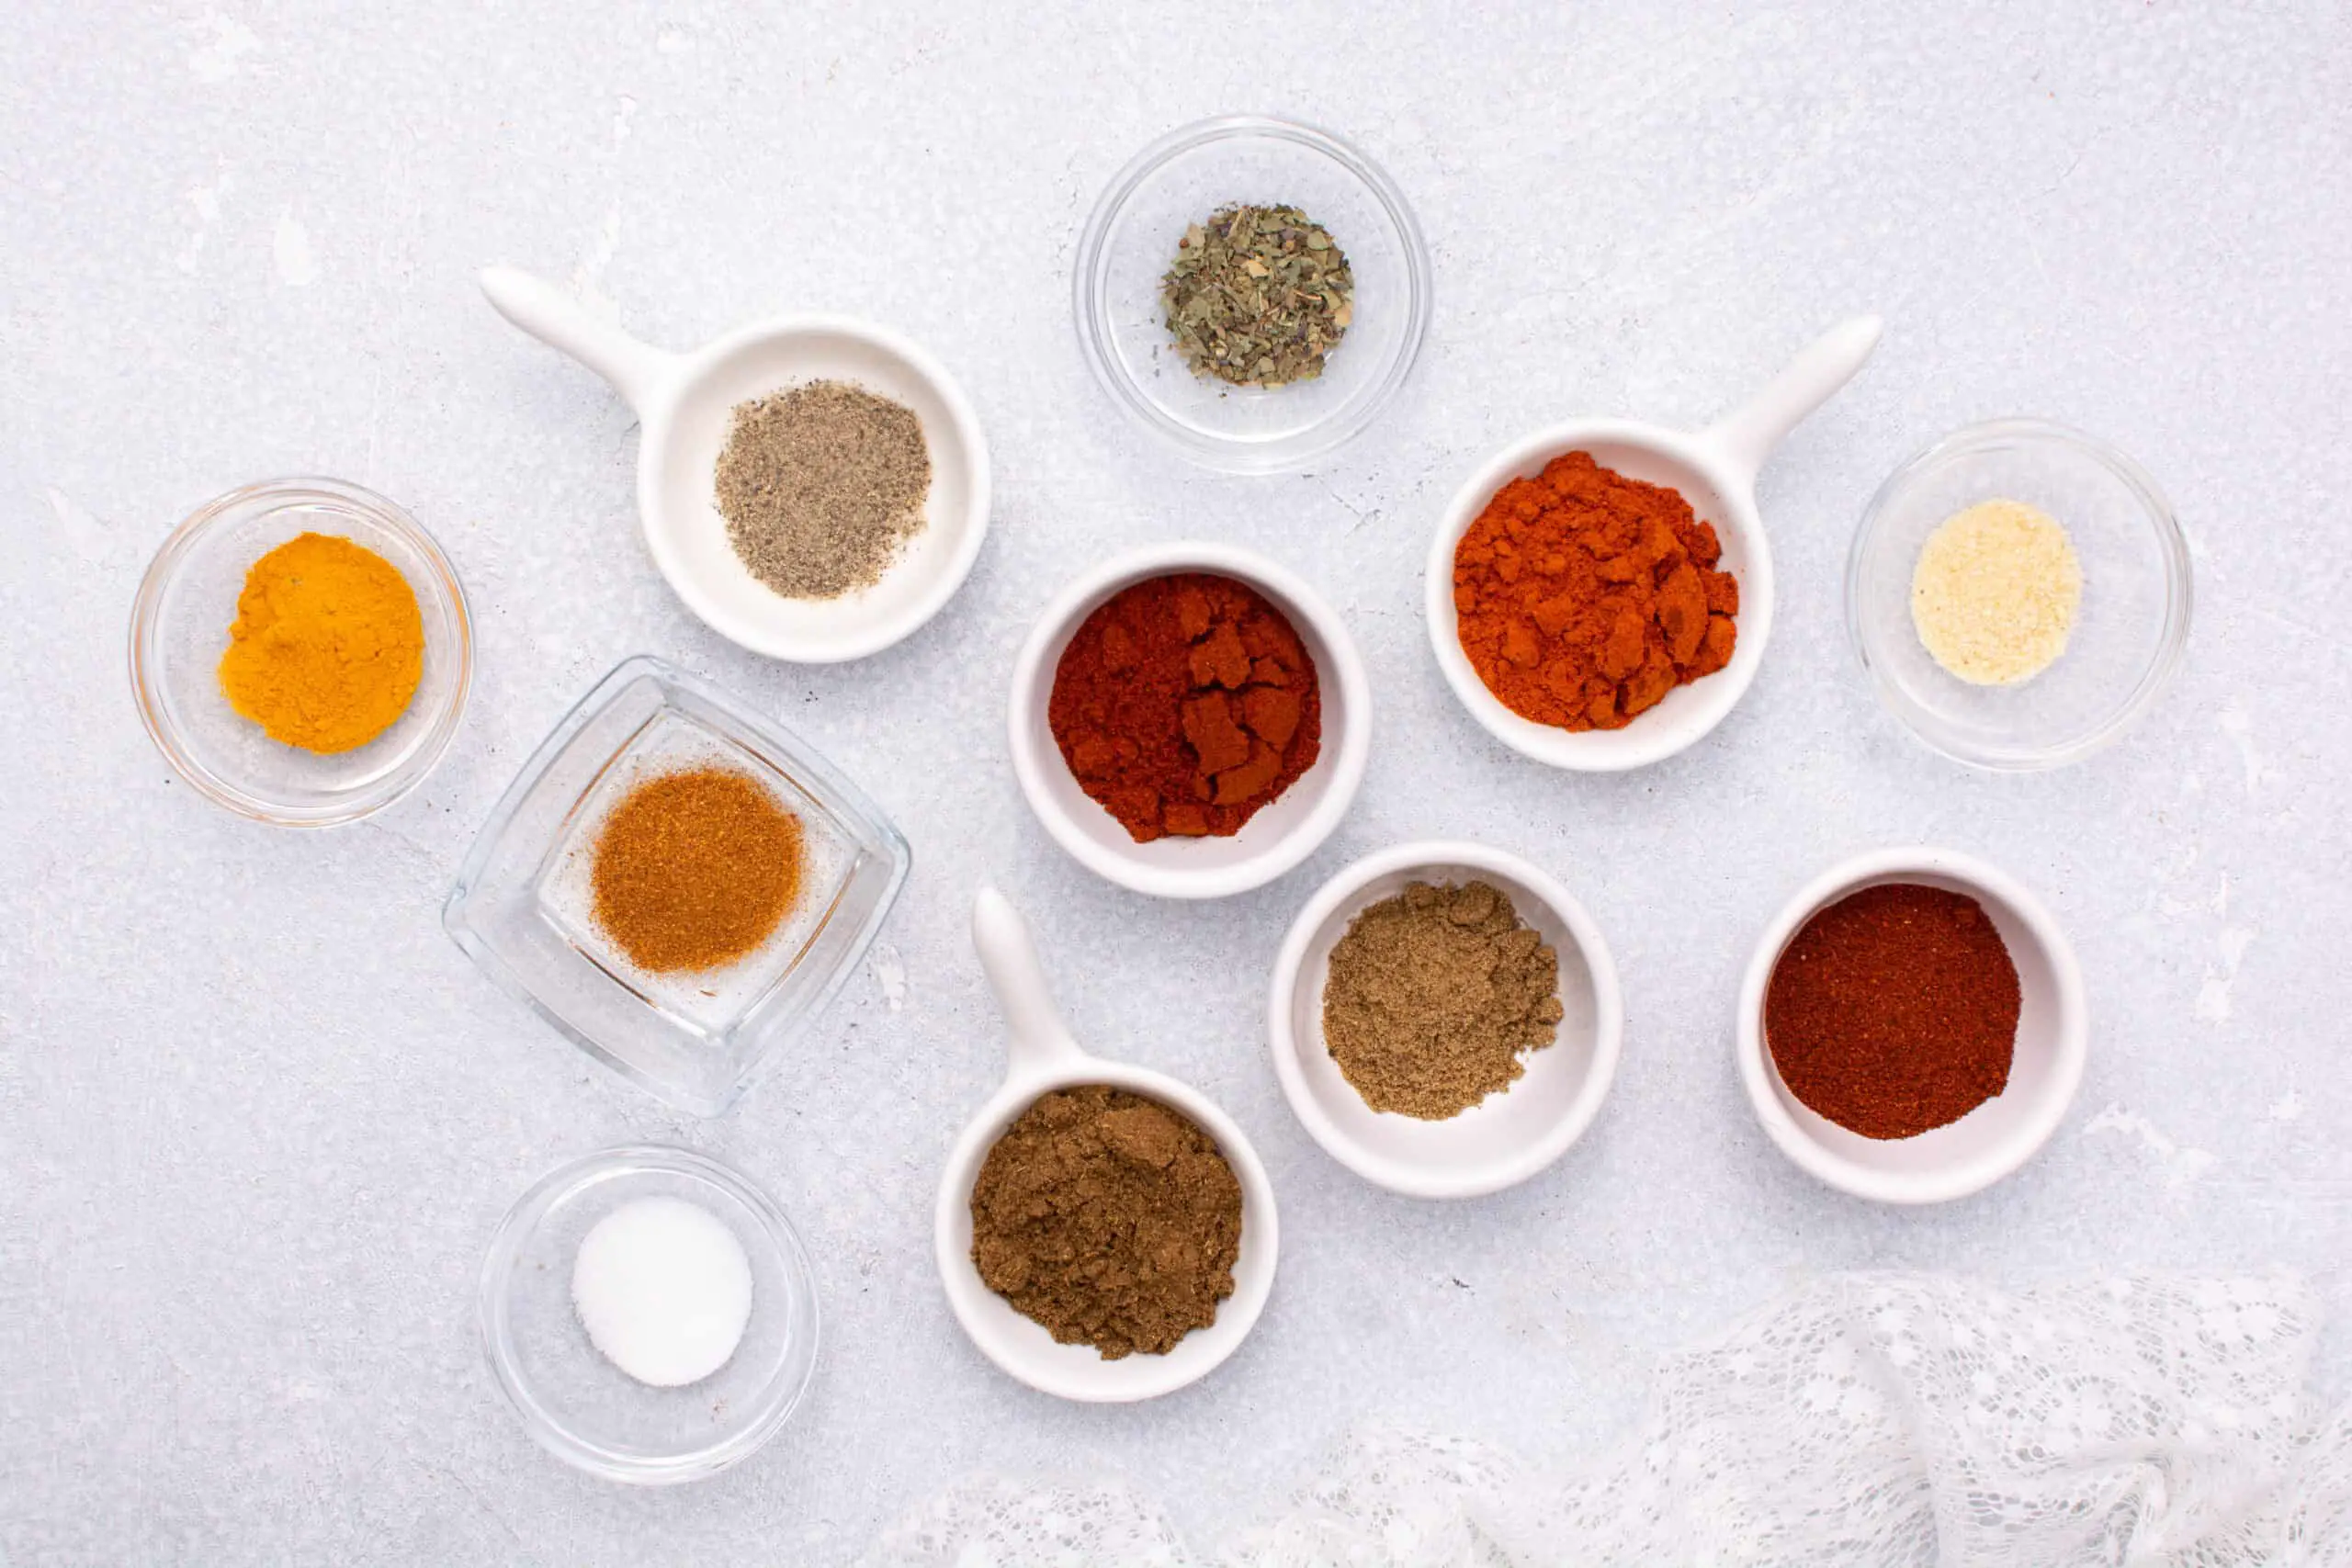 TYPES OF SPICES